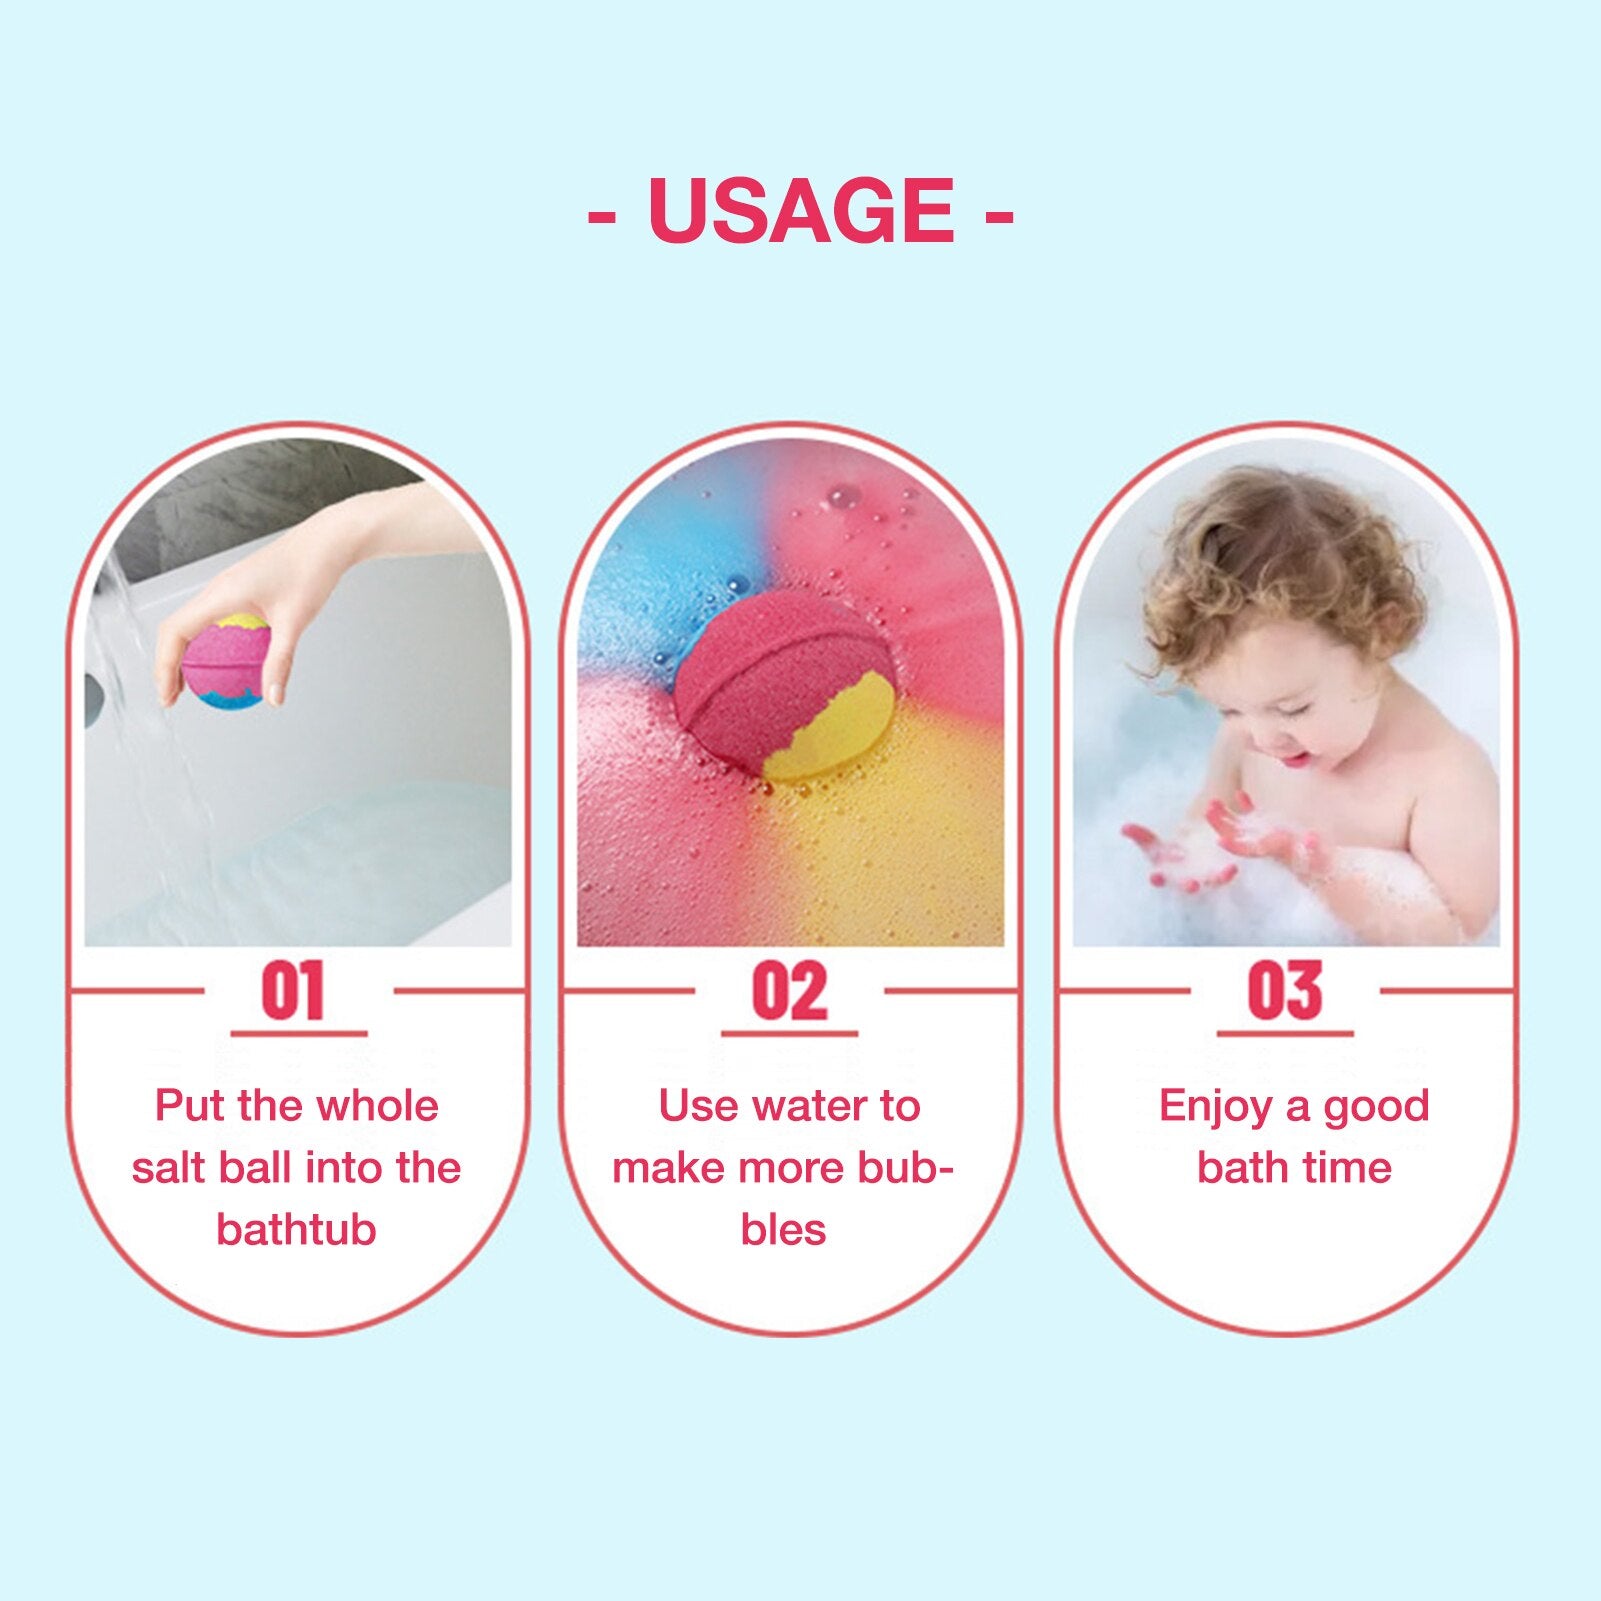 For Women Handmade Spa Bubble Bath Ball For Skin Moisturize With 13 Different Organic Flavors Birthday Gift Idea For Her Women